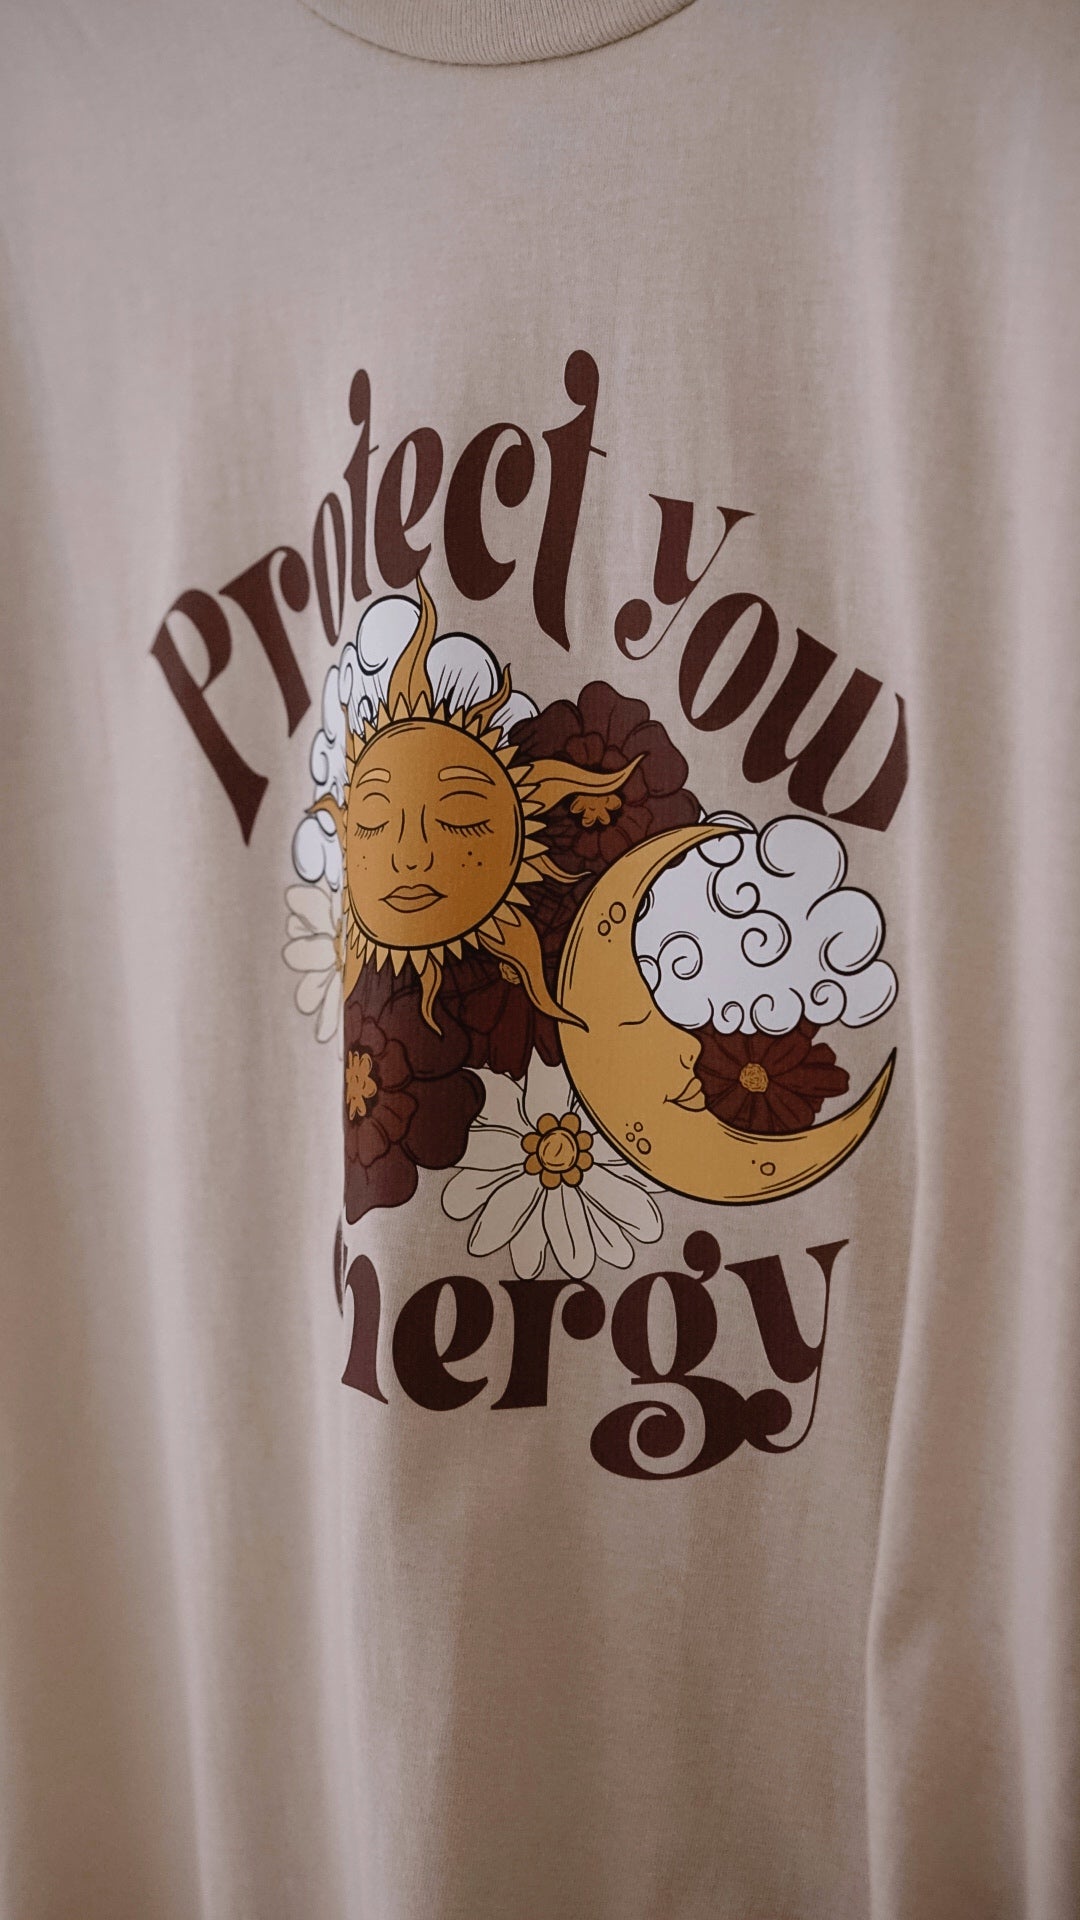 Protect your energy | t-shirt